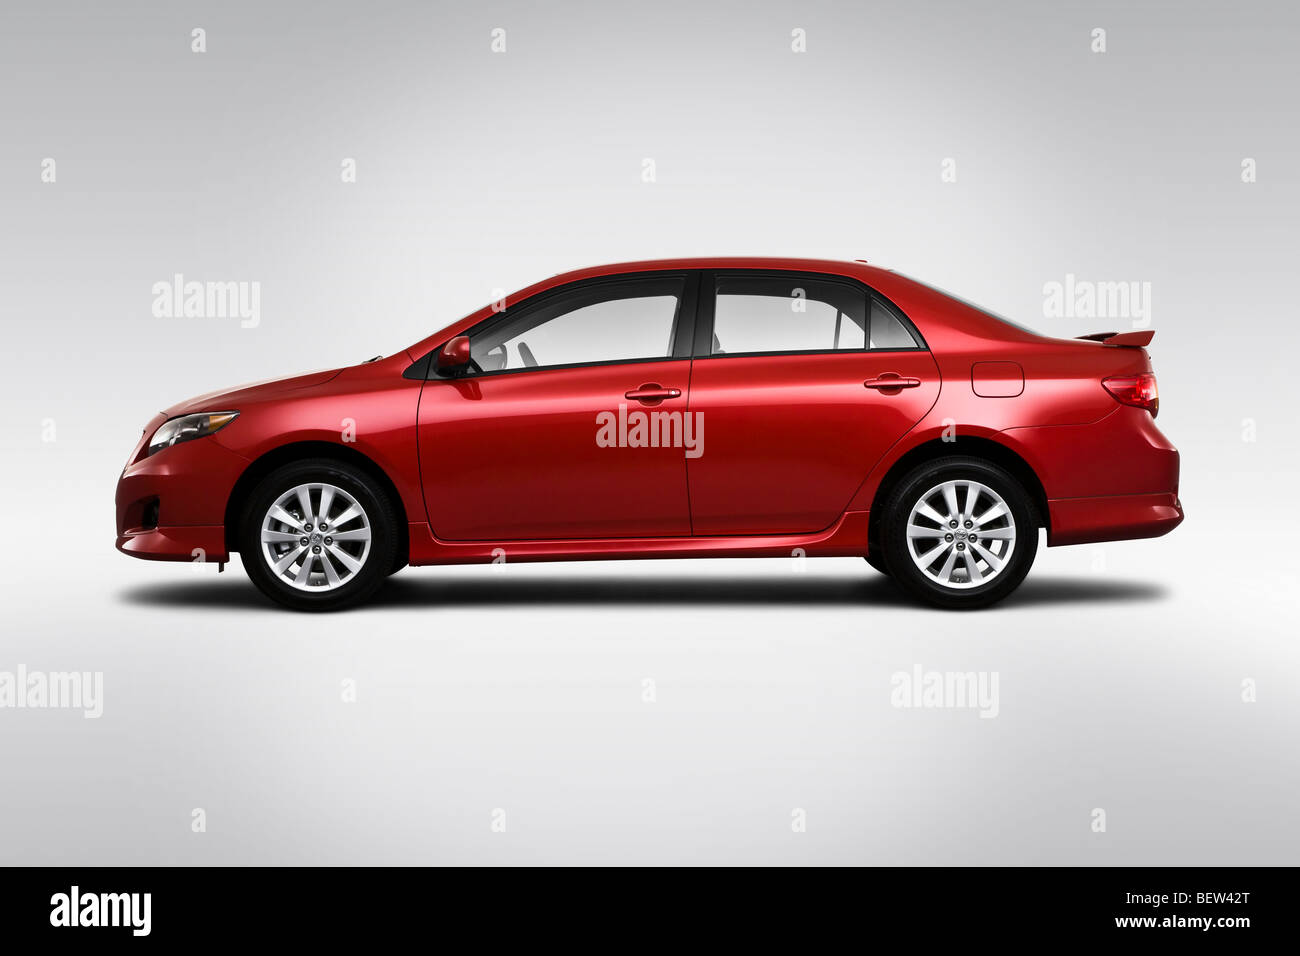 2010 Toyota Corolla S In Red Drivers Side Profile Stock Photo